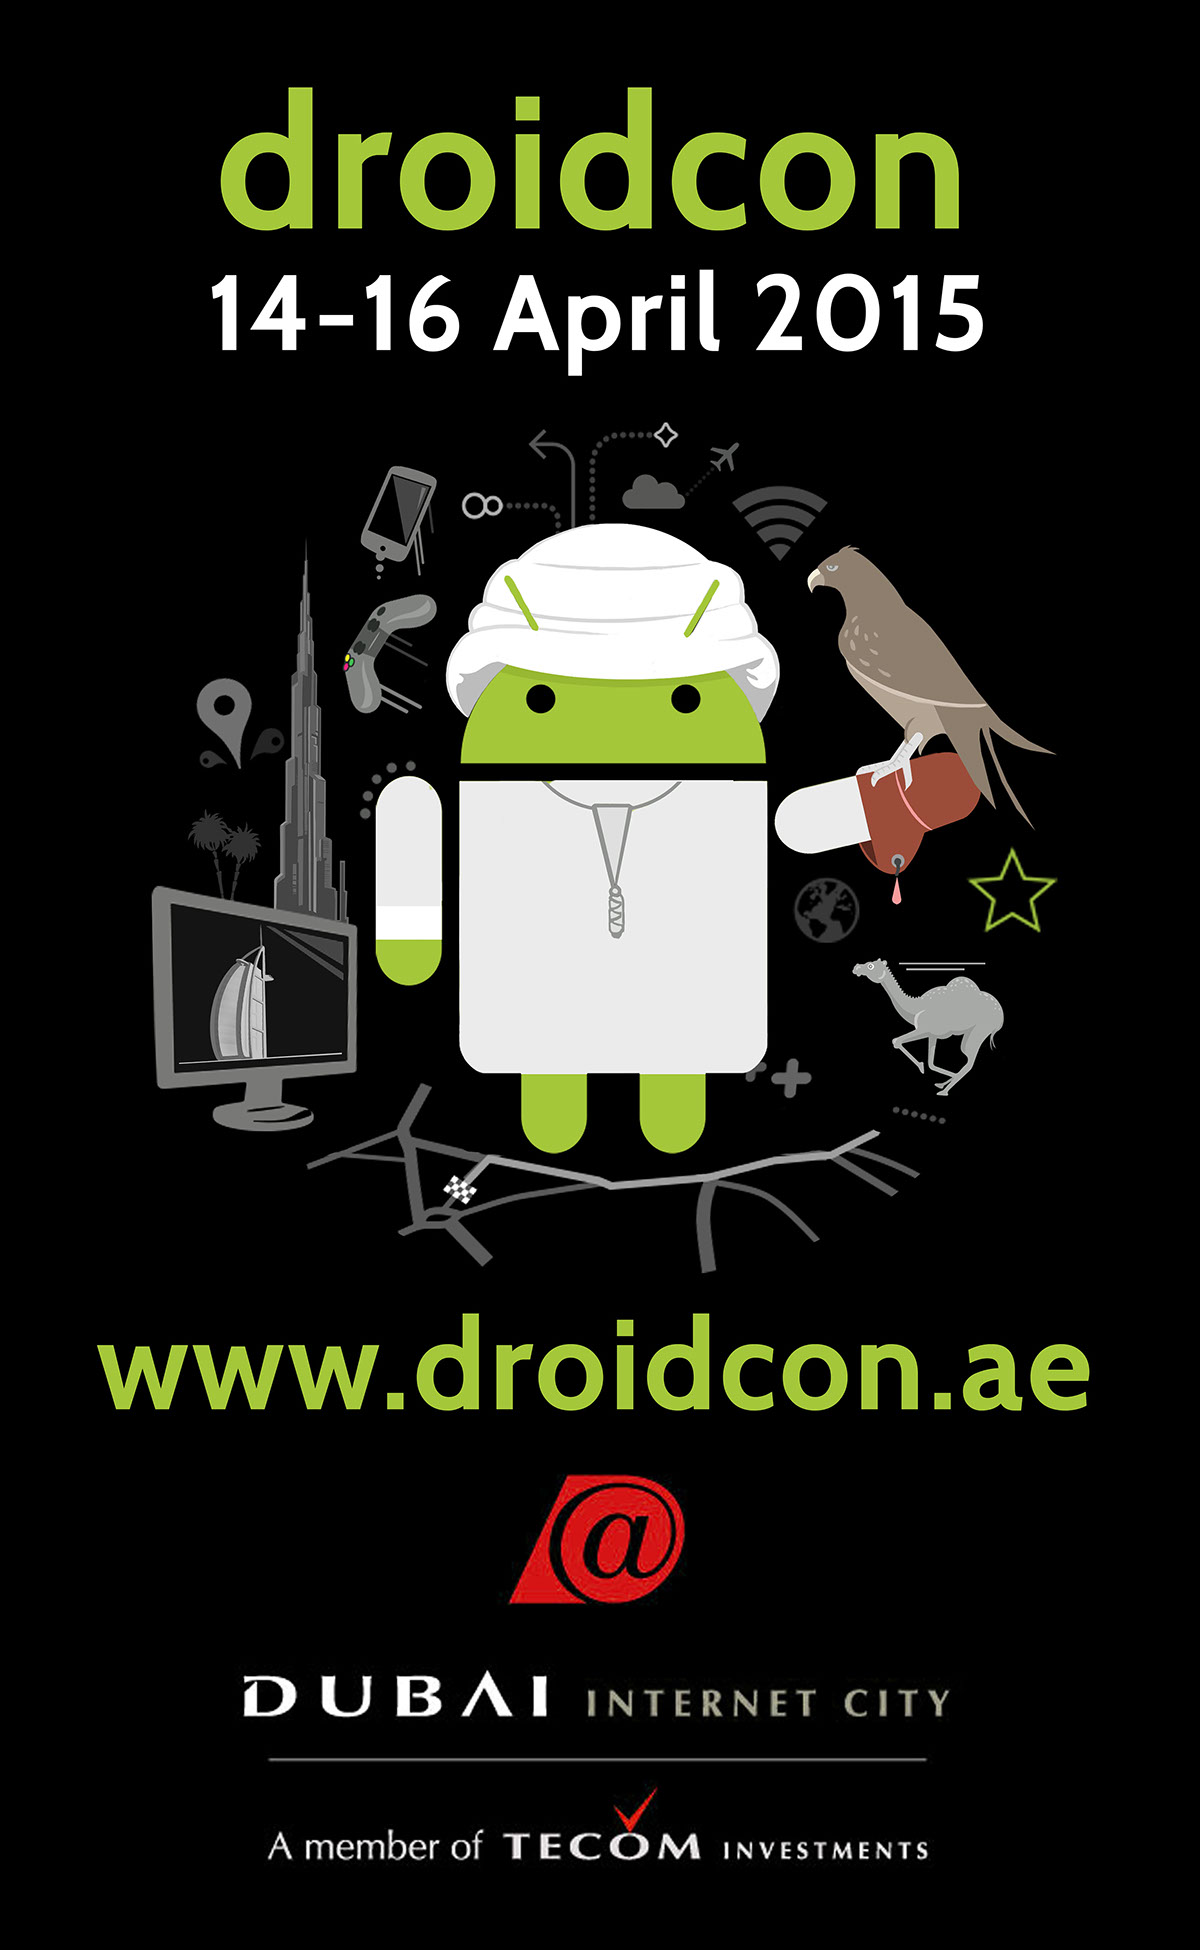 Droidcon dubai corporate identity Identity Design marketing   android smartphone tablet Technology android developer developer android conference Android green figure conference